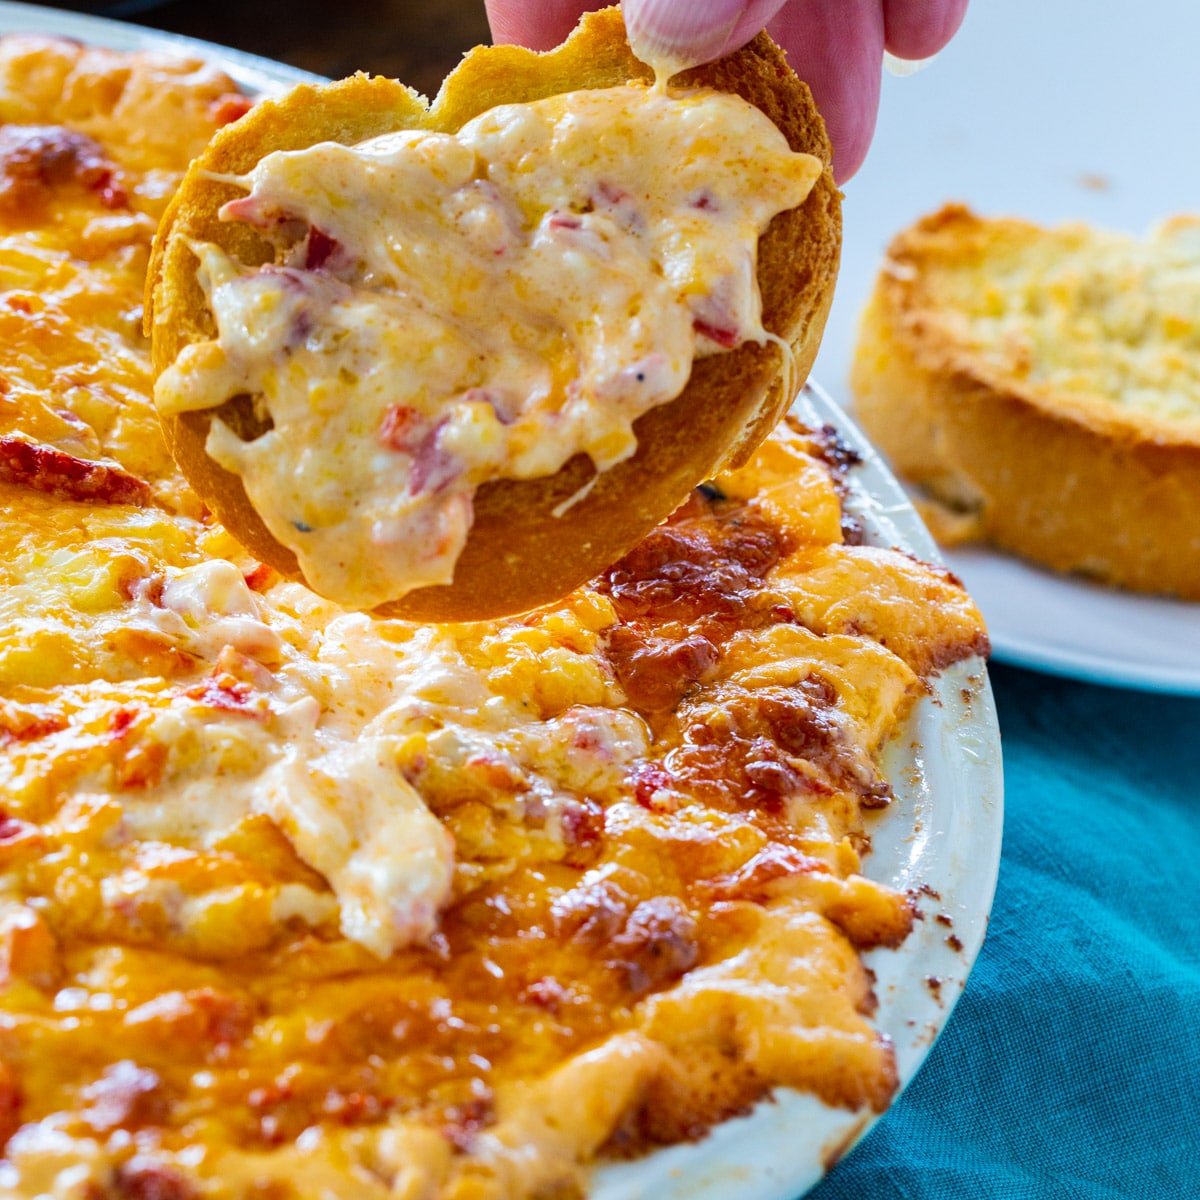 Baked Pimento Cheese Dip on a piece of toasted baguette.